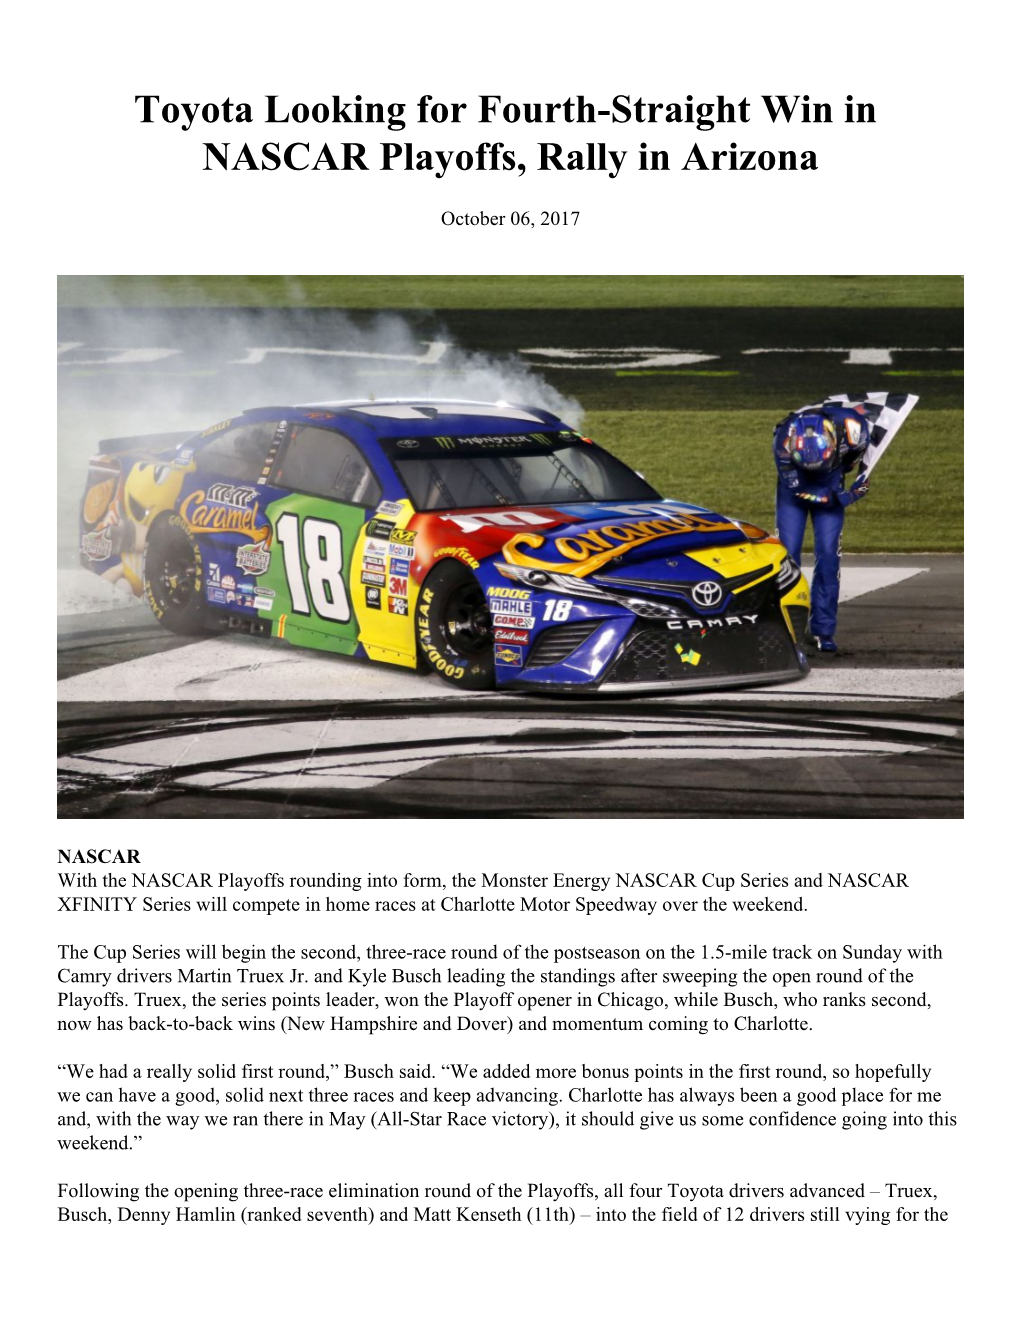 Toyota Looking for Fourth-Straight Win in NASCAR Playoffs, Rally in Arizona